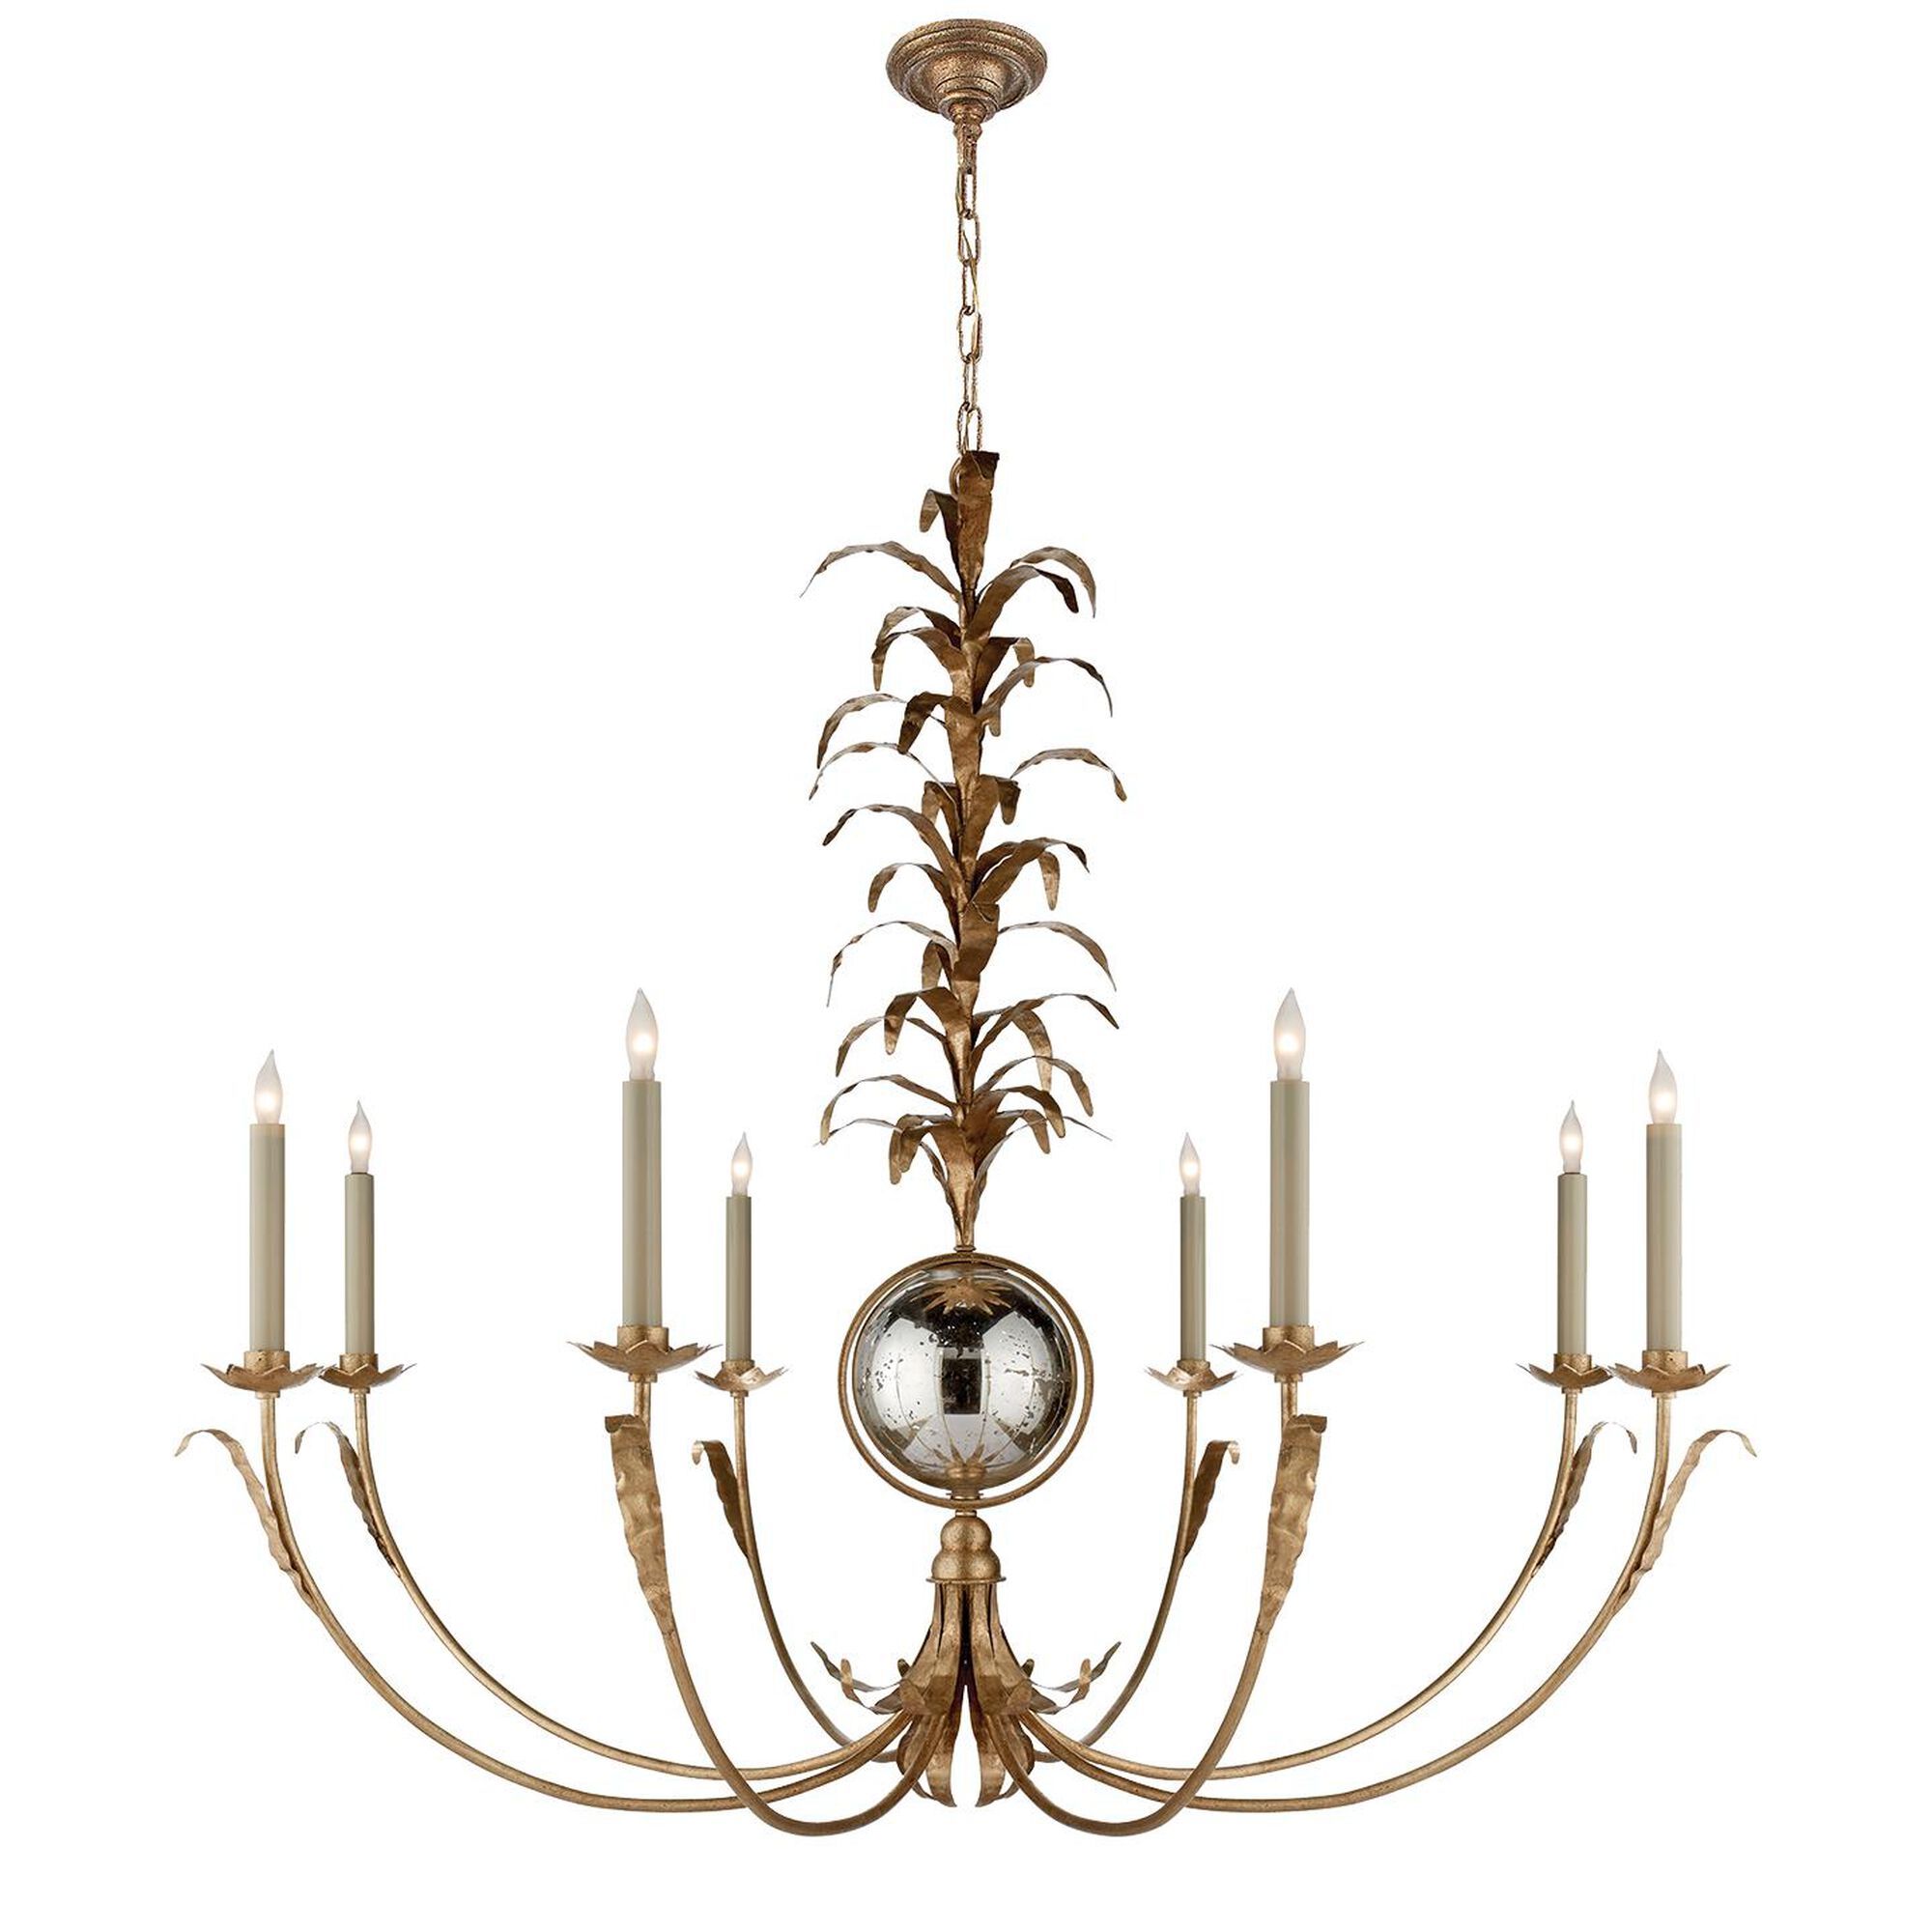 E. F. Chapman Gramercy 41 Inch 8 Light Chandelier by Visual Comfort and Co. | Capitol Lighting 1800lighting.com